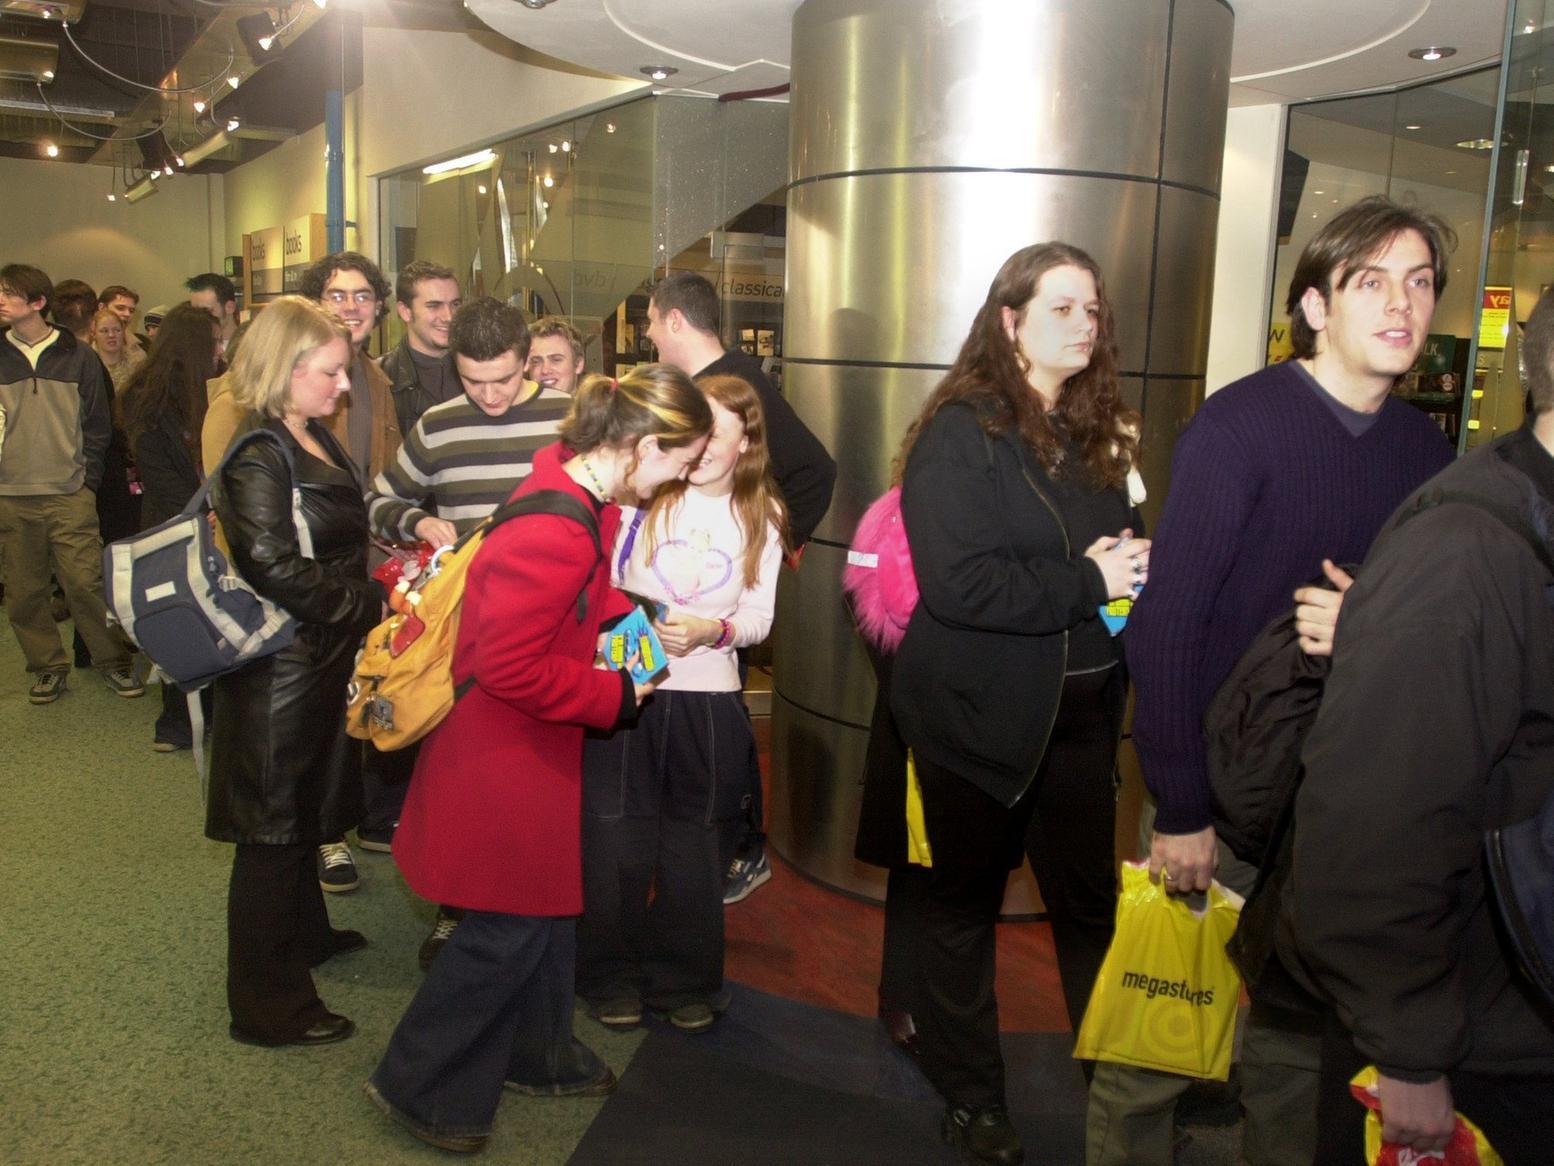 Fans queue to meet Terrorvision - best known for their hit Tequila - at Virgin Megastore in the city centre.